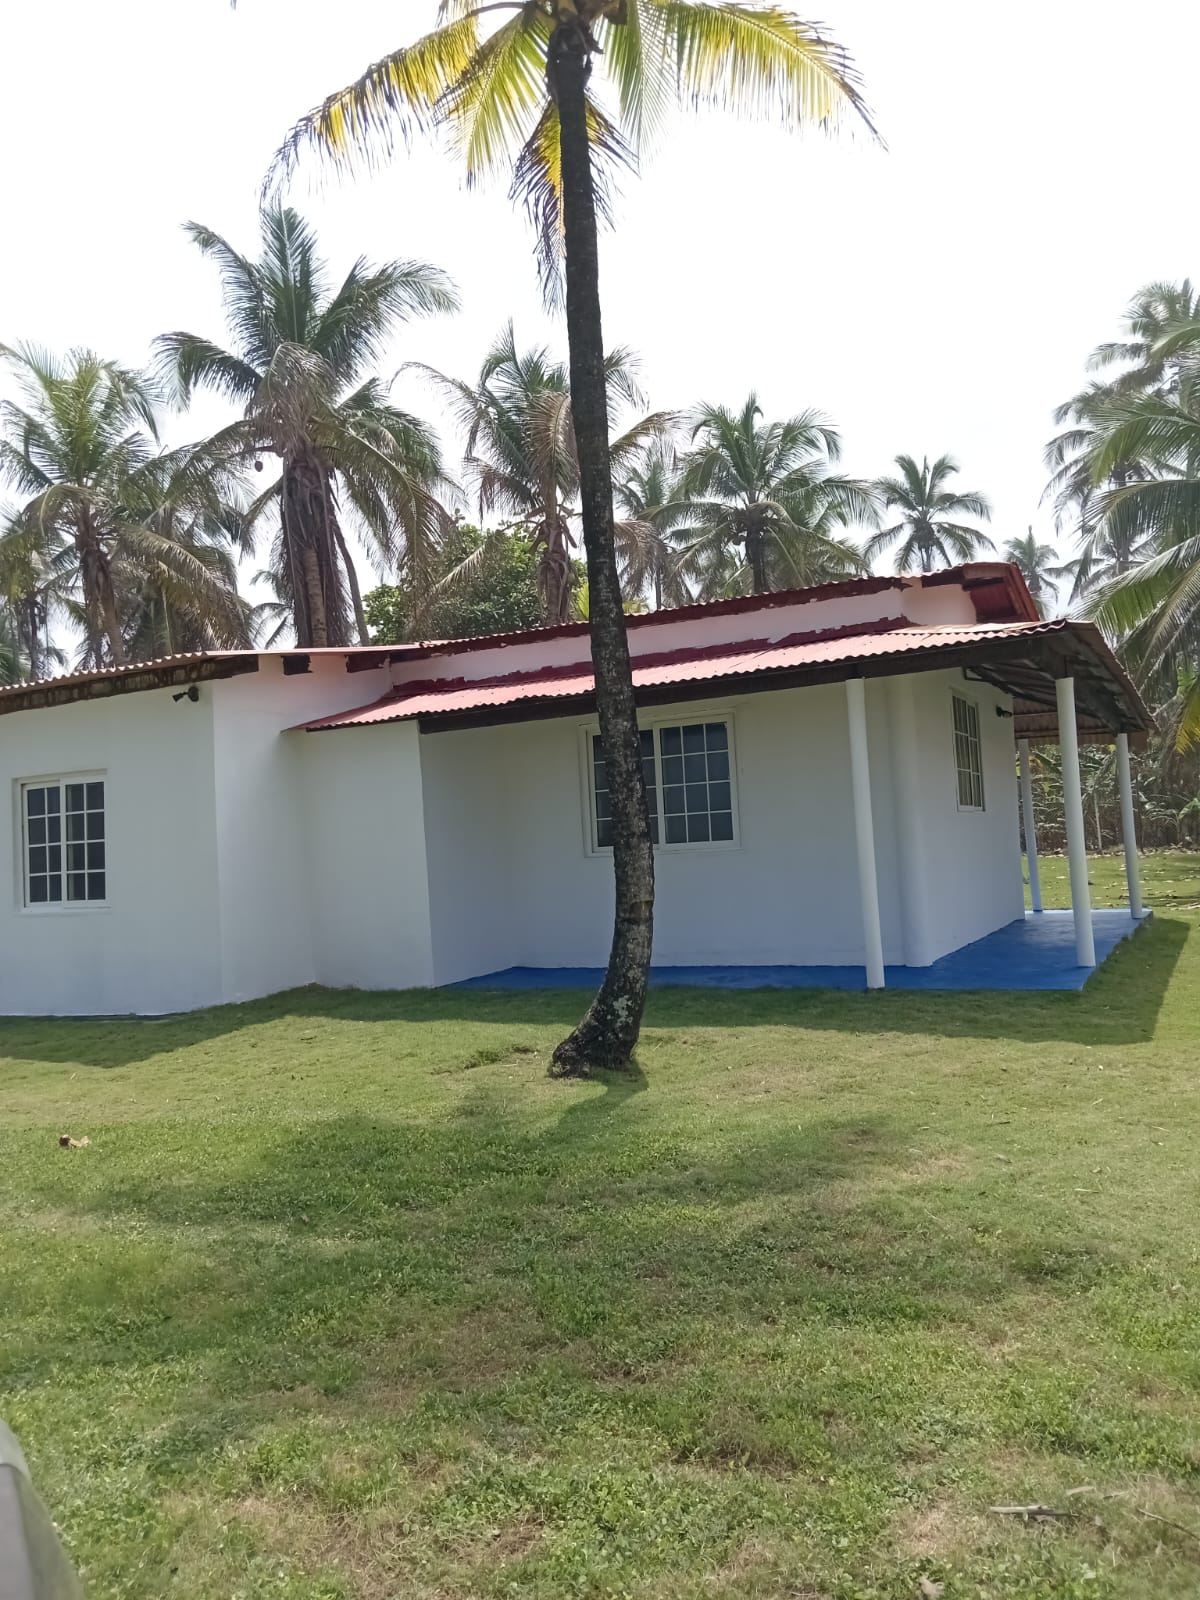 Charming 3 Bed/3 Bath Beach House for Sale in Palenque, Santa Isabel - $175,000